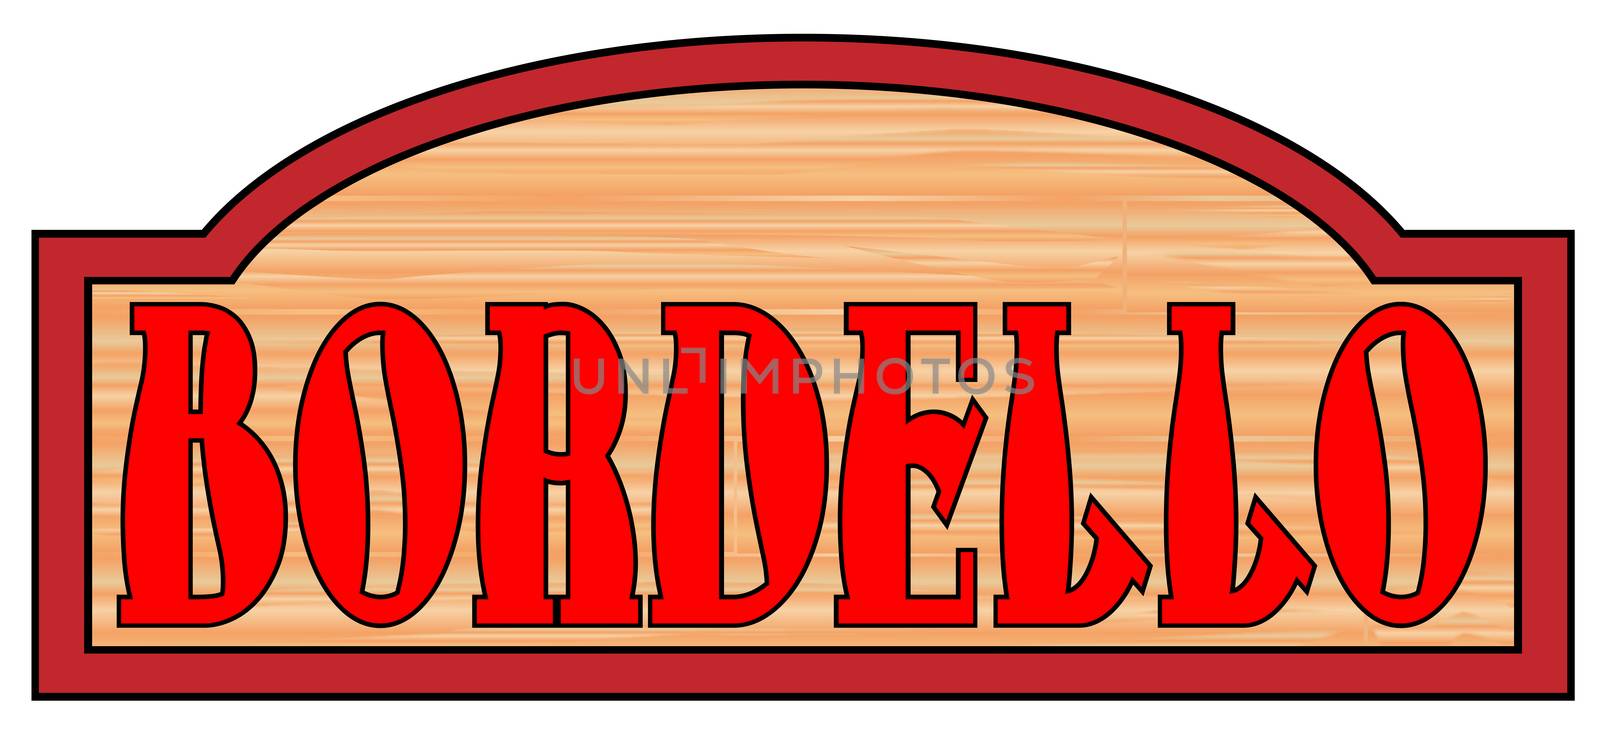 Wooden bordello house sign over a black background